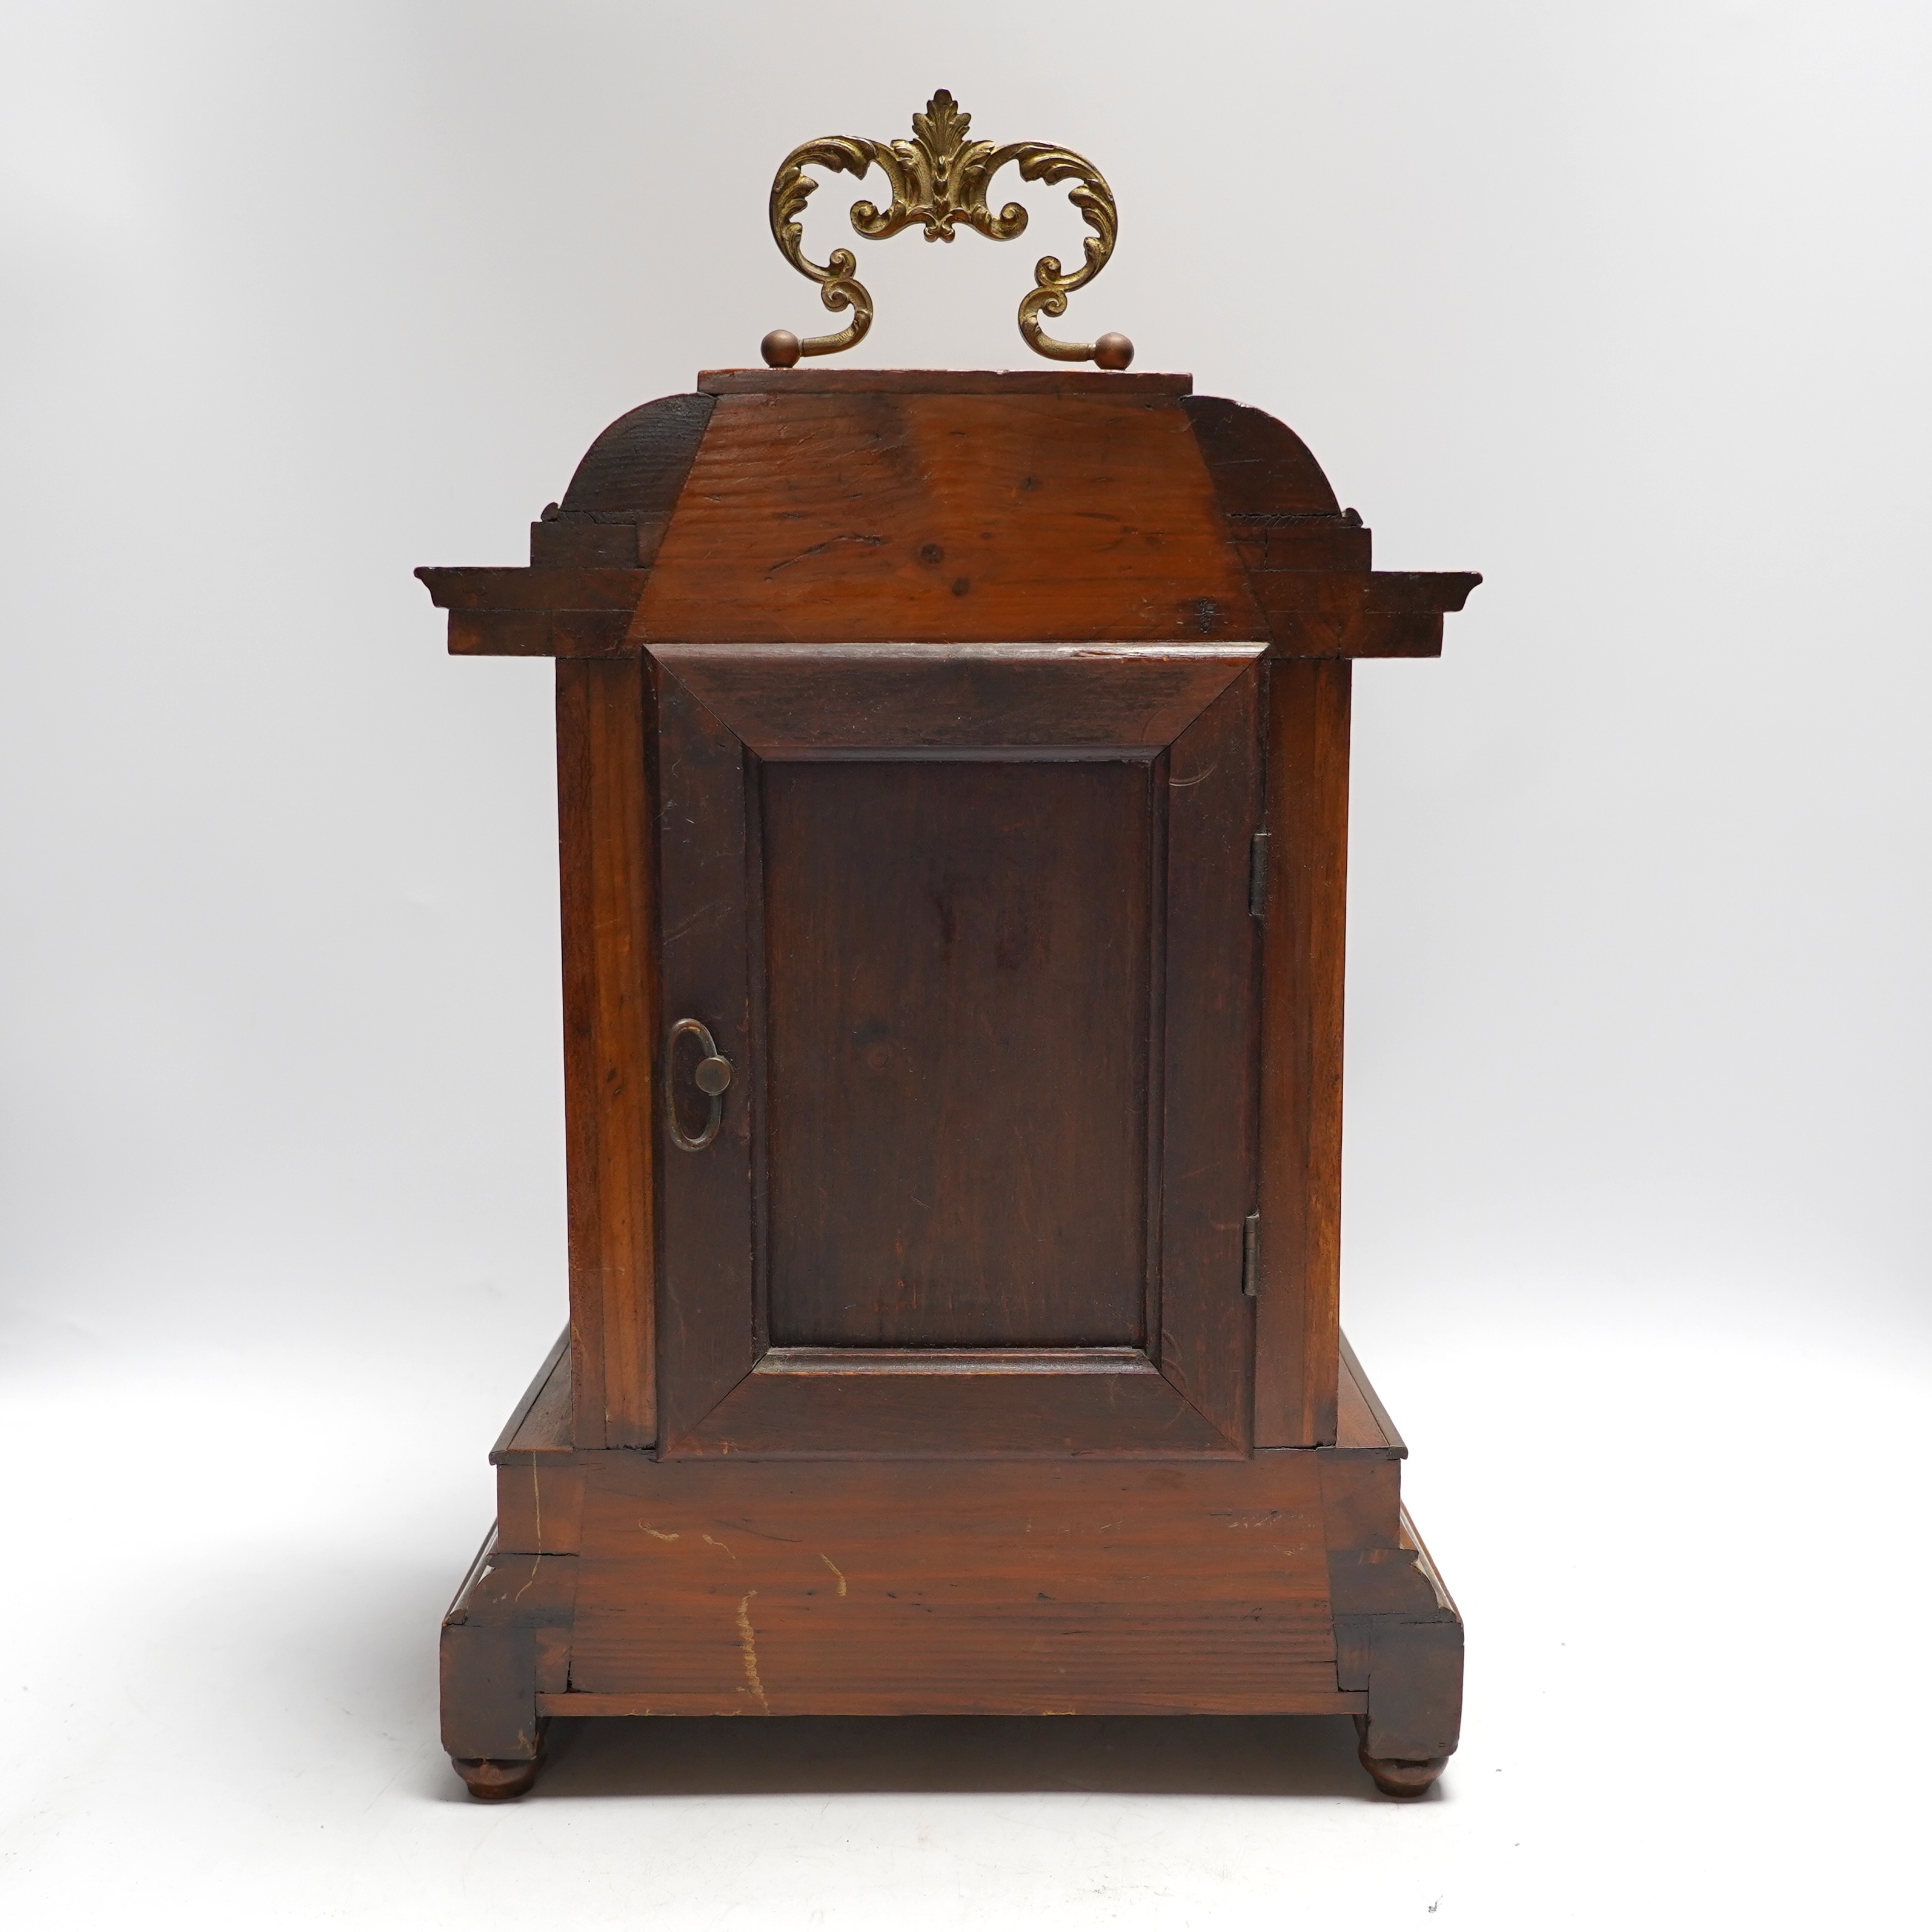 A Black Forest mantel clock with an HAC, Wurttemberg movement, striking on a coiled gong, 35cm high together with an early 20th century inlaid mahogany mantel clock